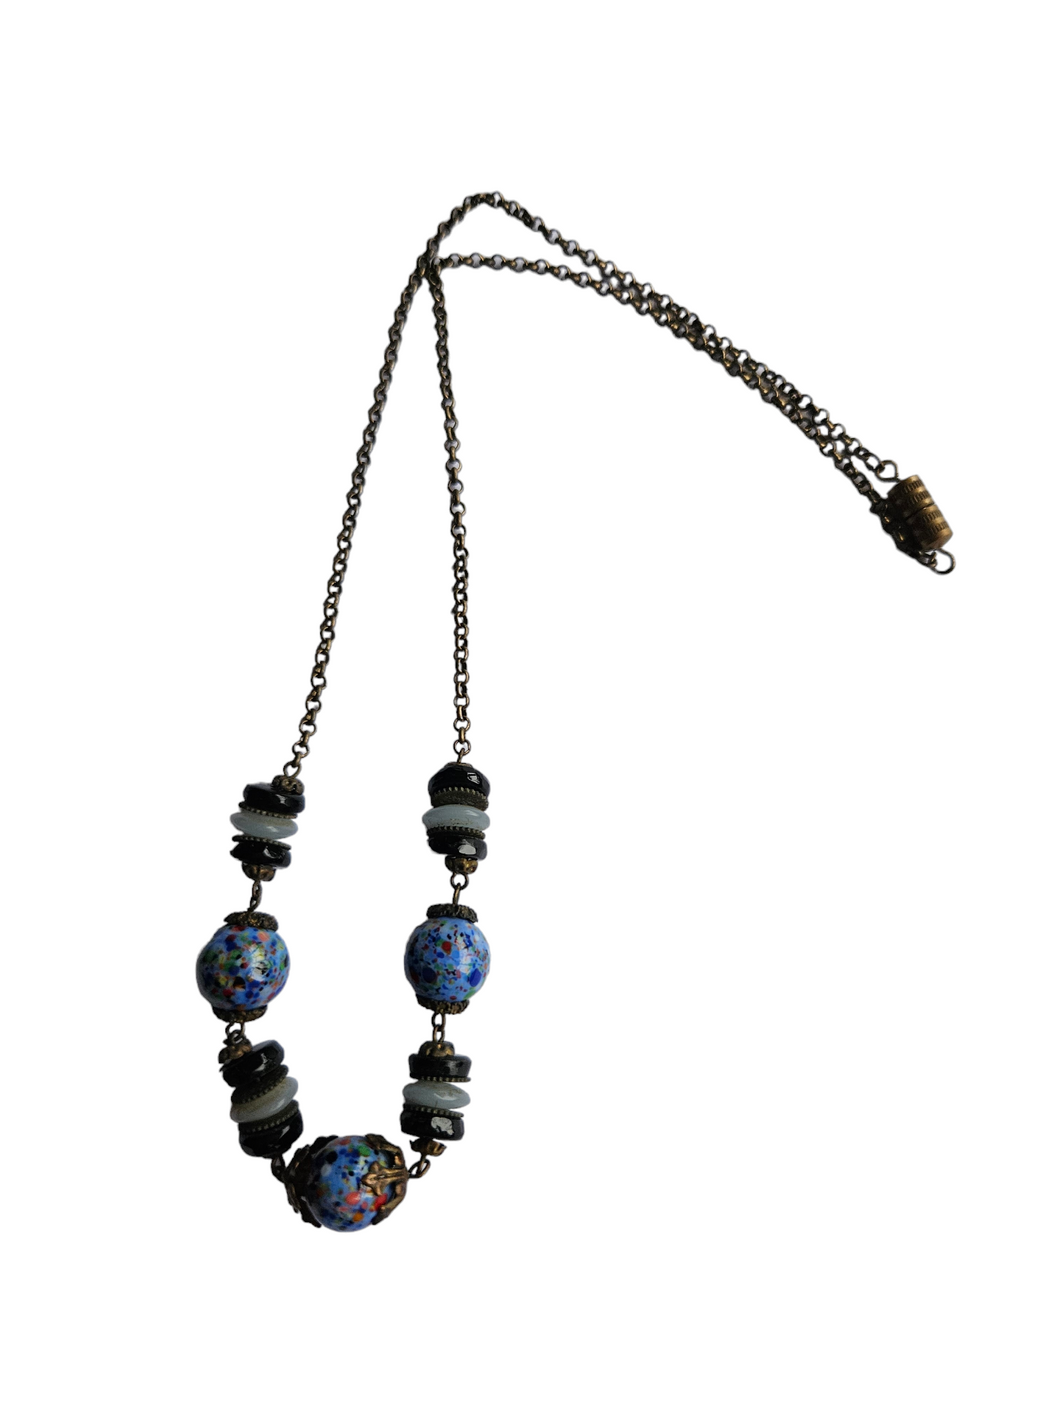 1930s Blue Speckled, Black Glass and Metal Necklace